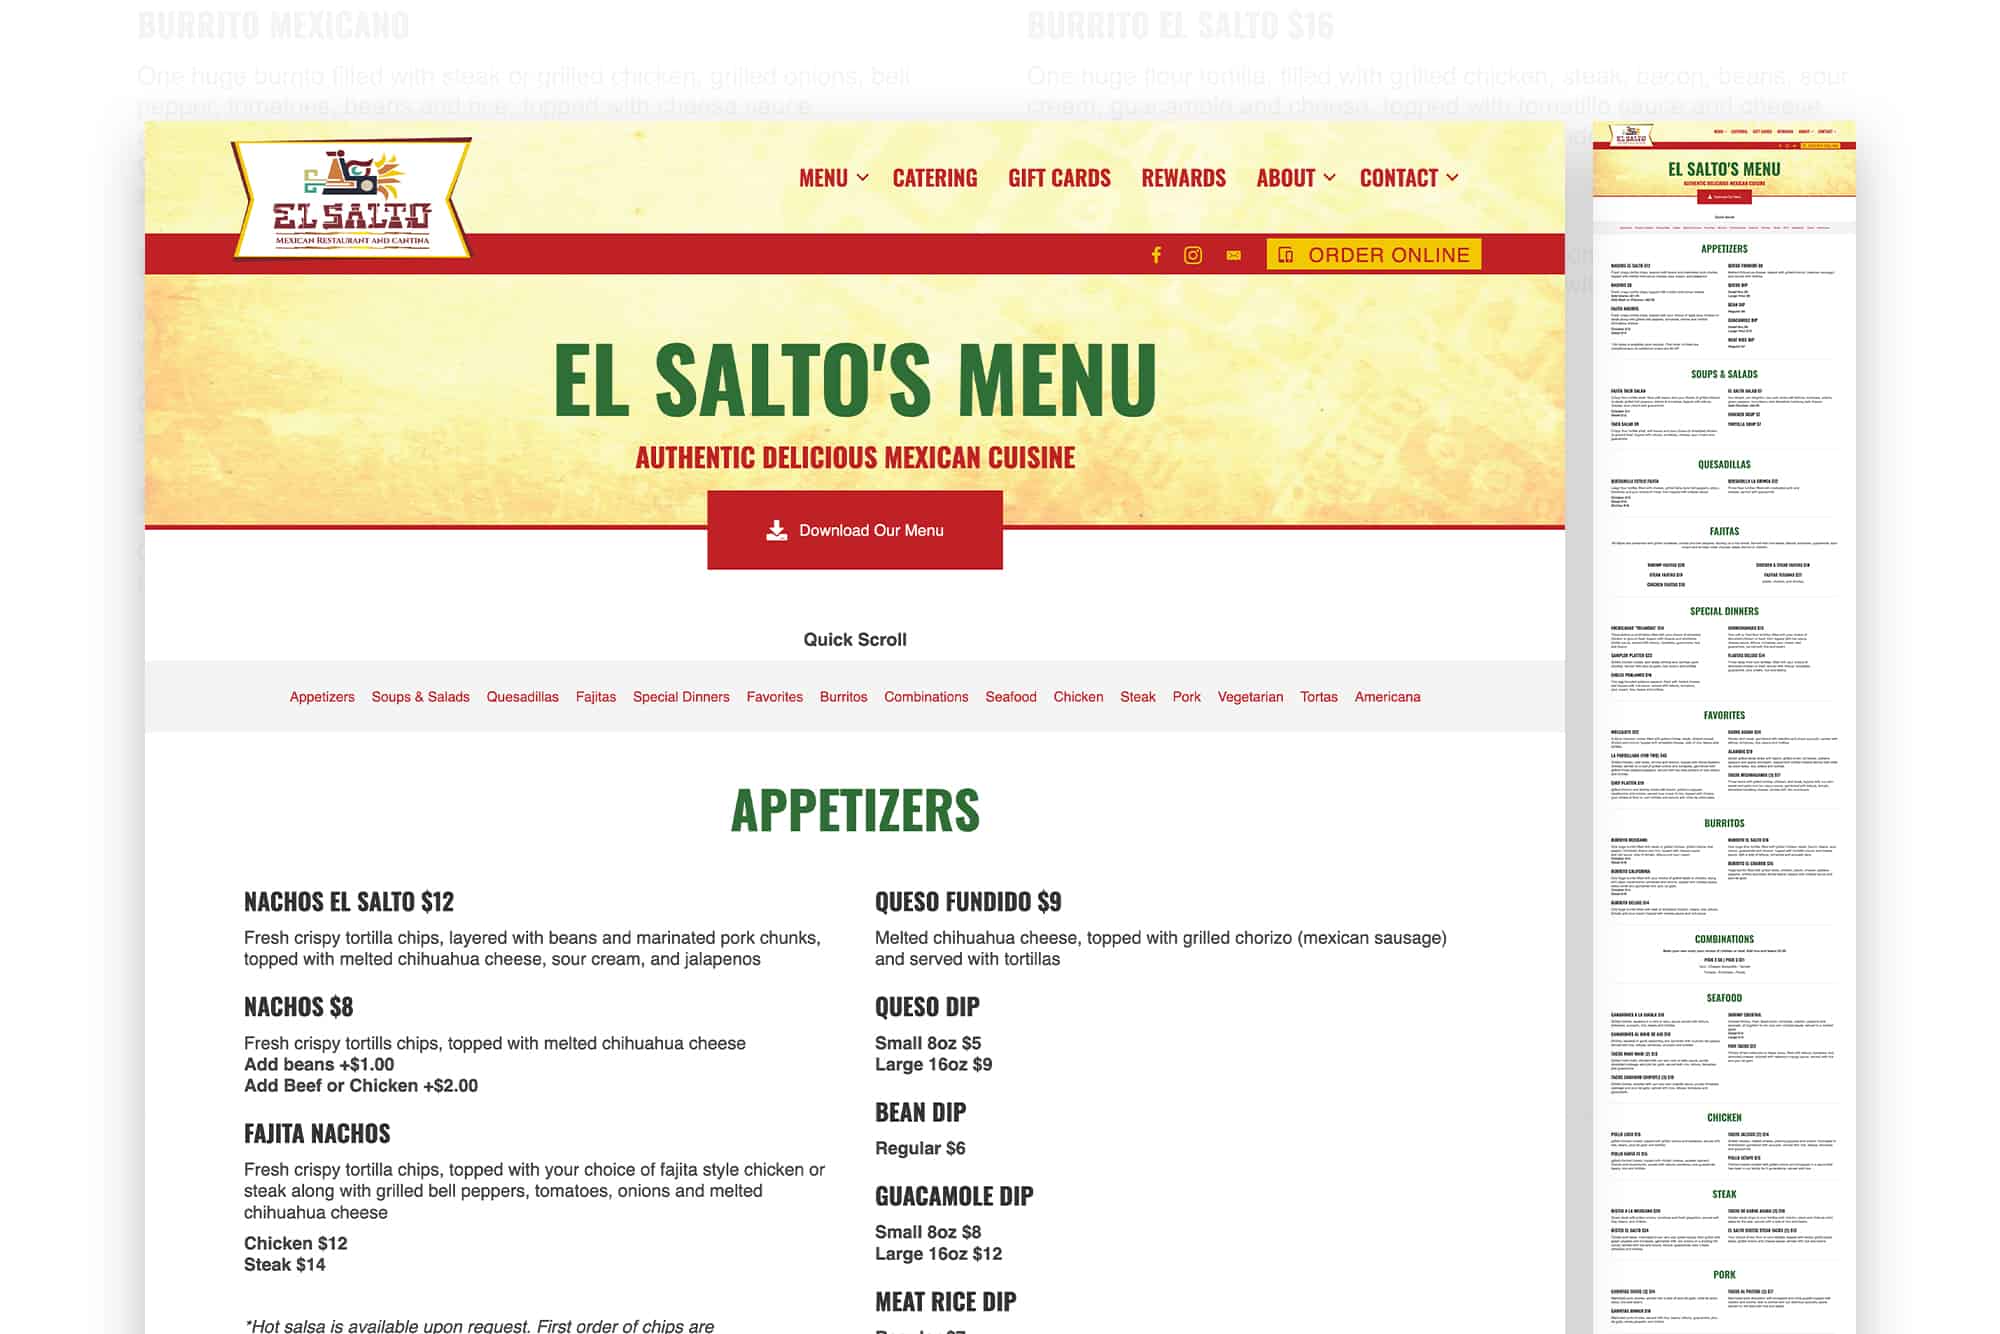 El Salto | Web Design and Content Creation for Mexican Restaurants in Northwest Indiana 2